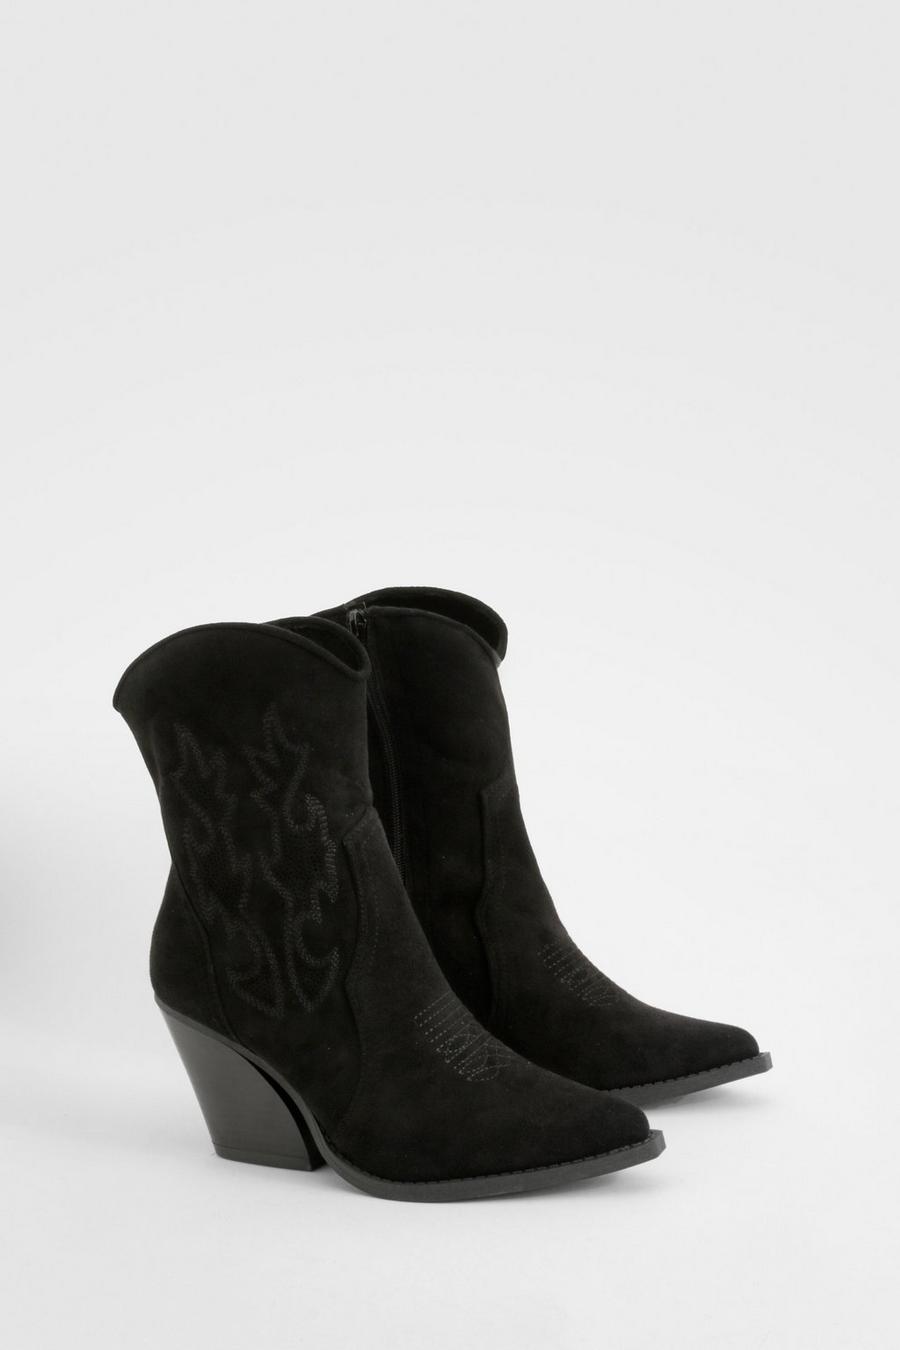 Black Embroidered Calf High Cowboy Boots